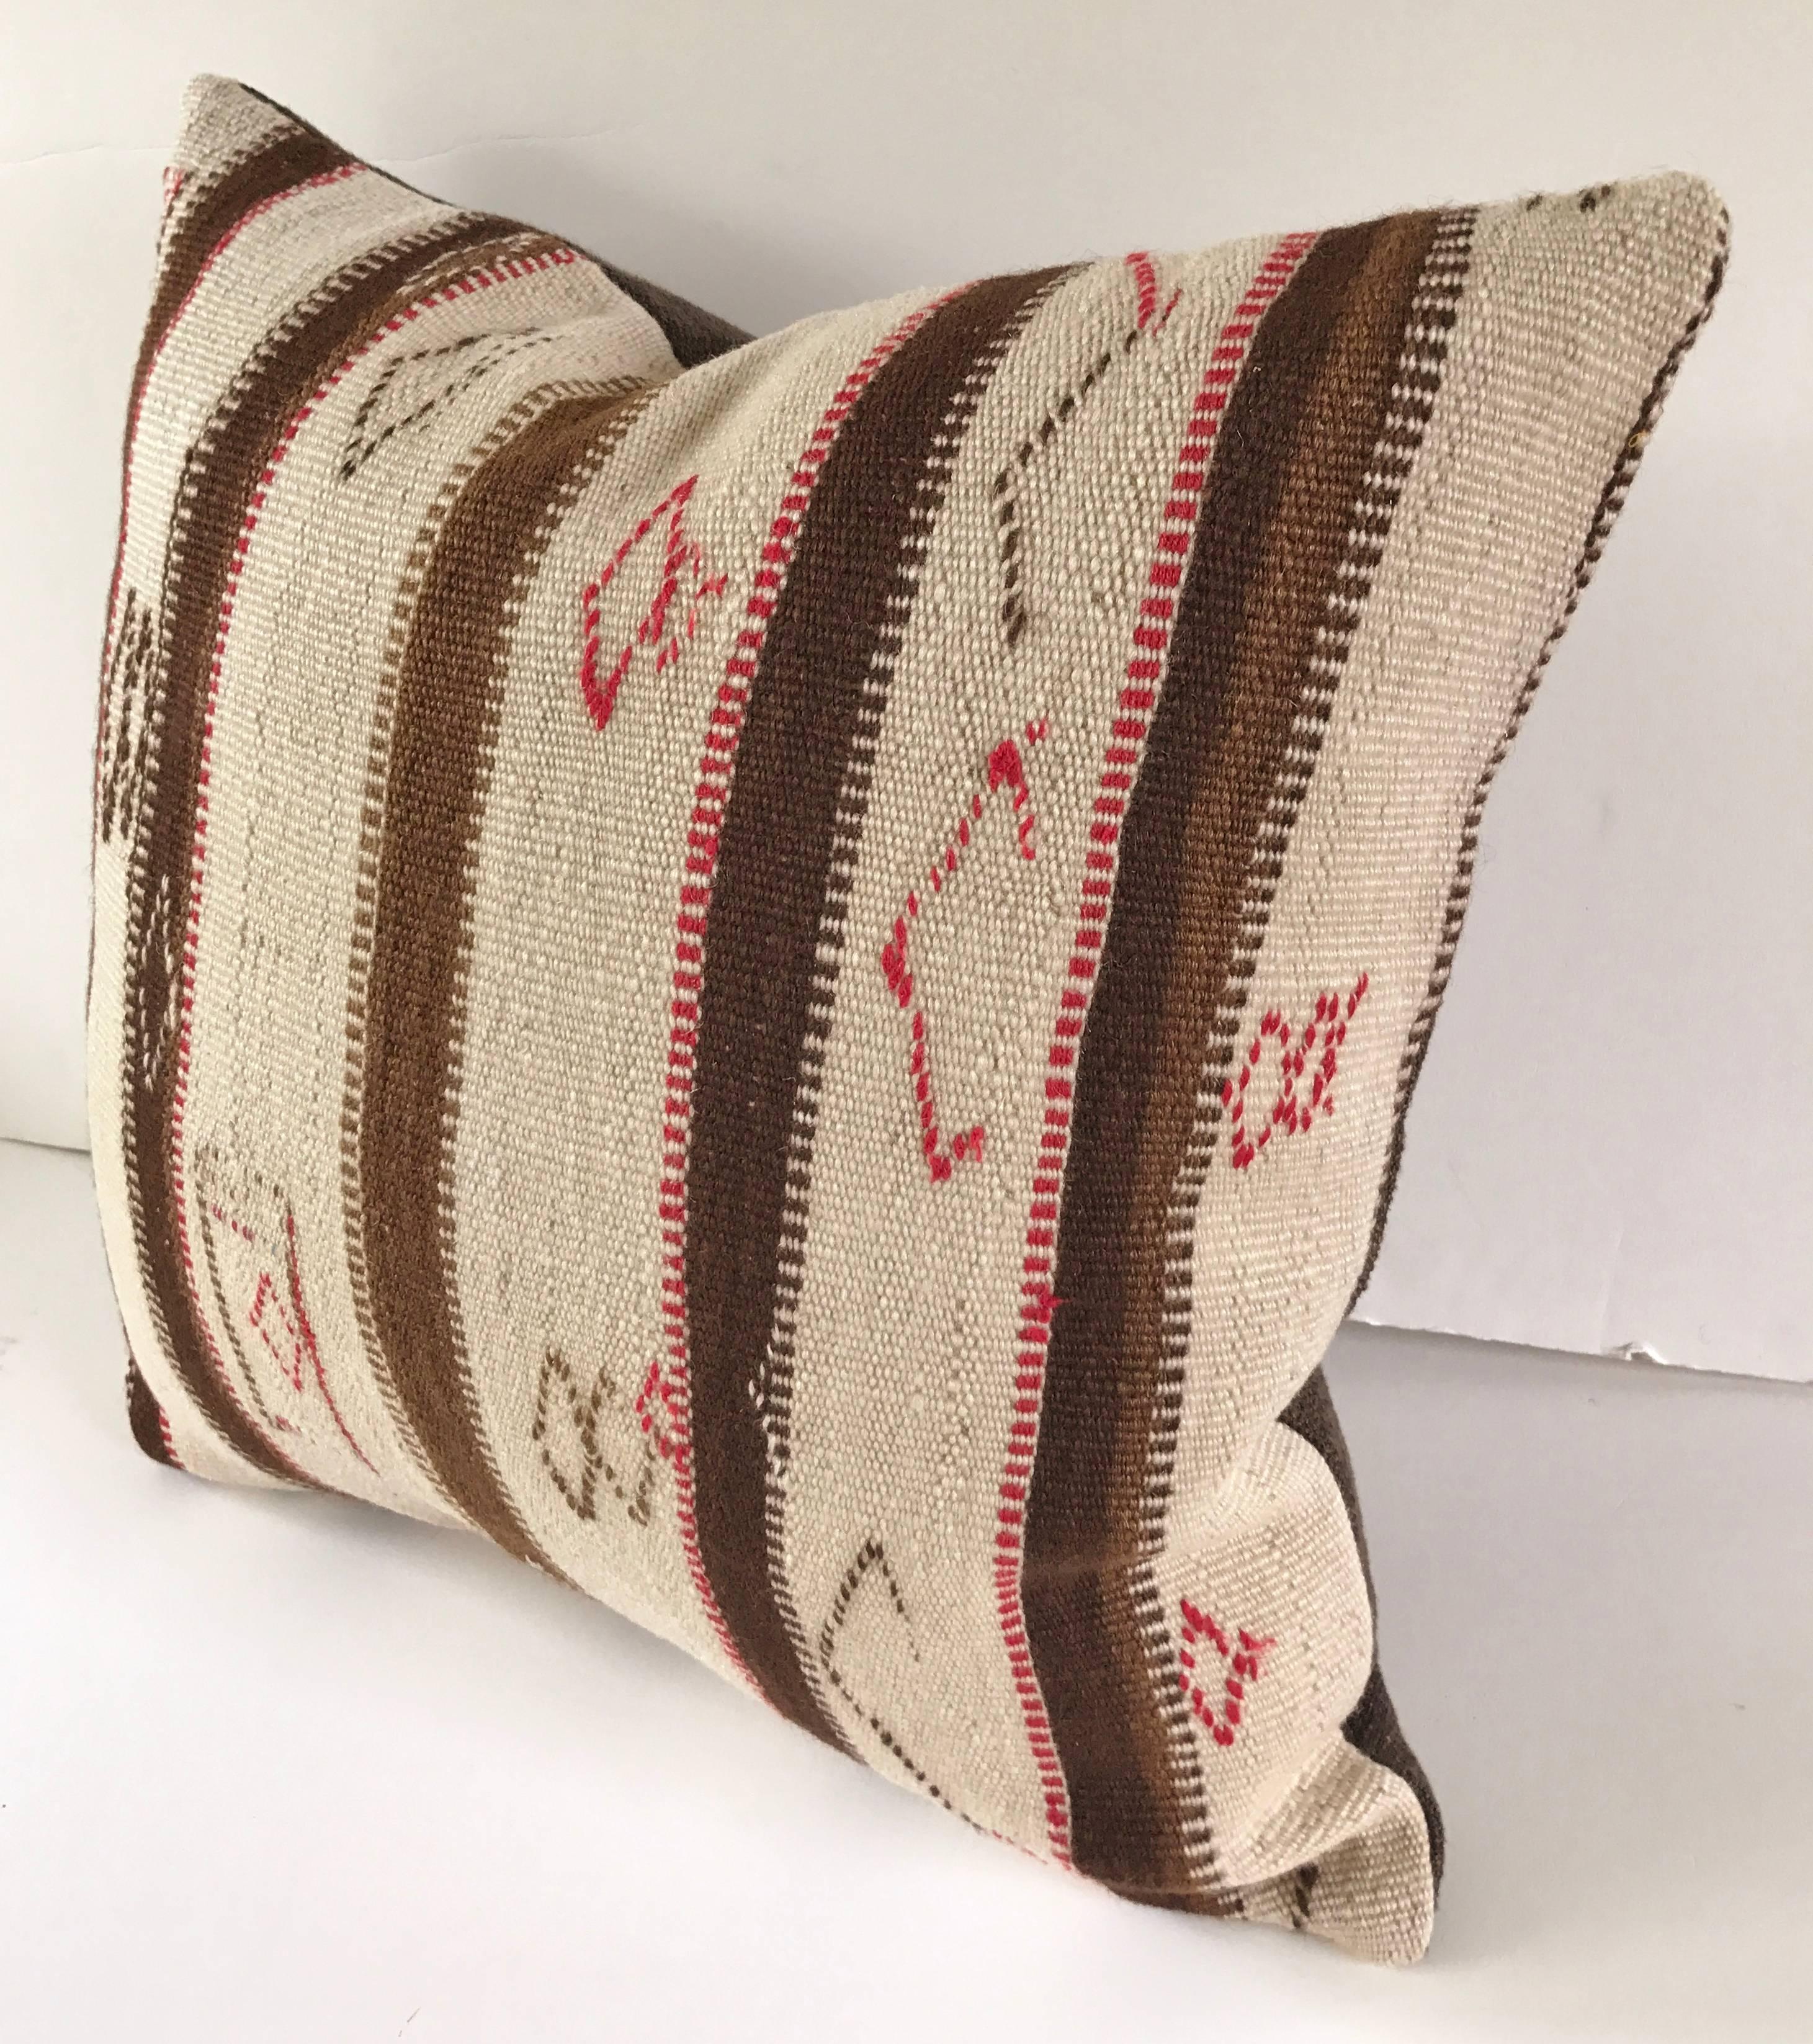 Custom pillow cut from a vintage hand loomed wool Moroccan Berber rug from the Atlas Mountains. Wool is soft and lustrous with tribal designs incorporated into the stripes. Pillow is backed in a dark brown linen blend, filled with an insert of 50/50